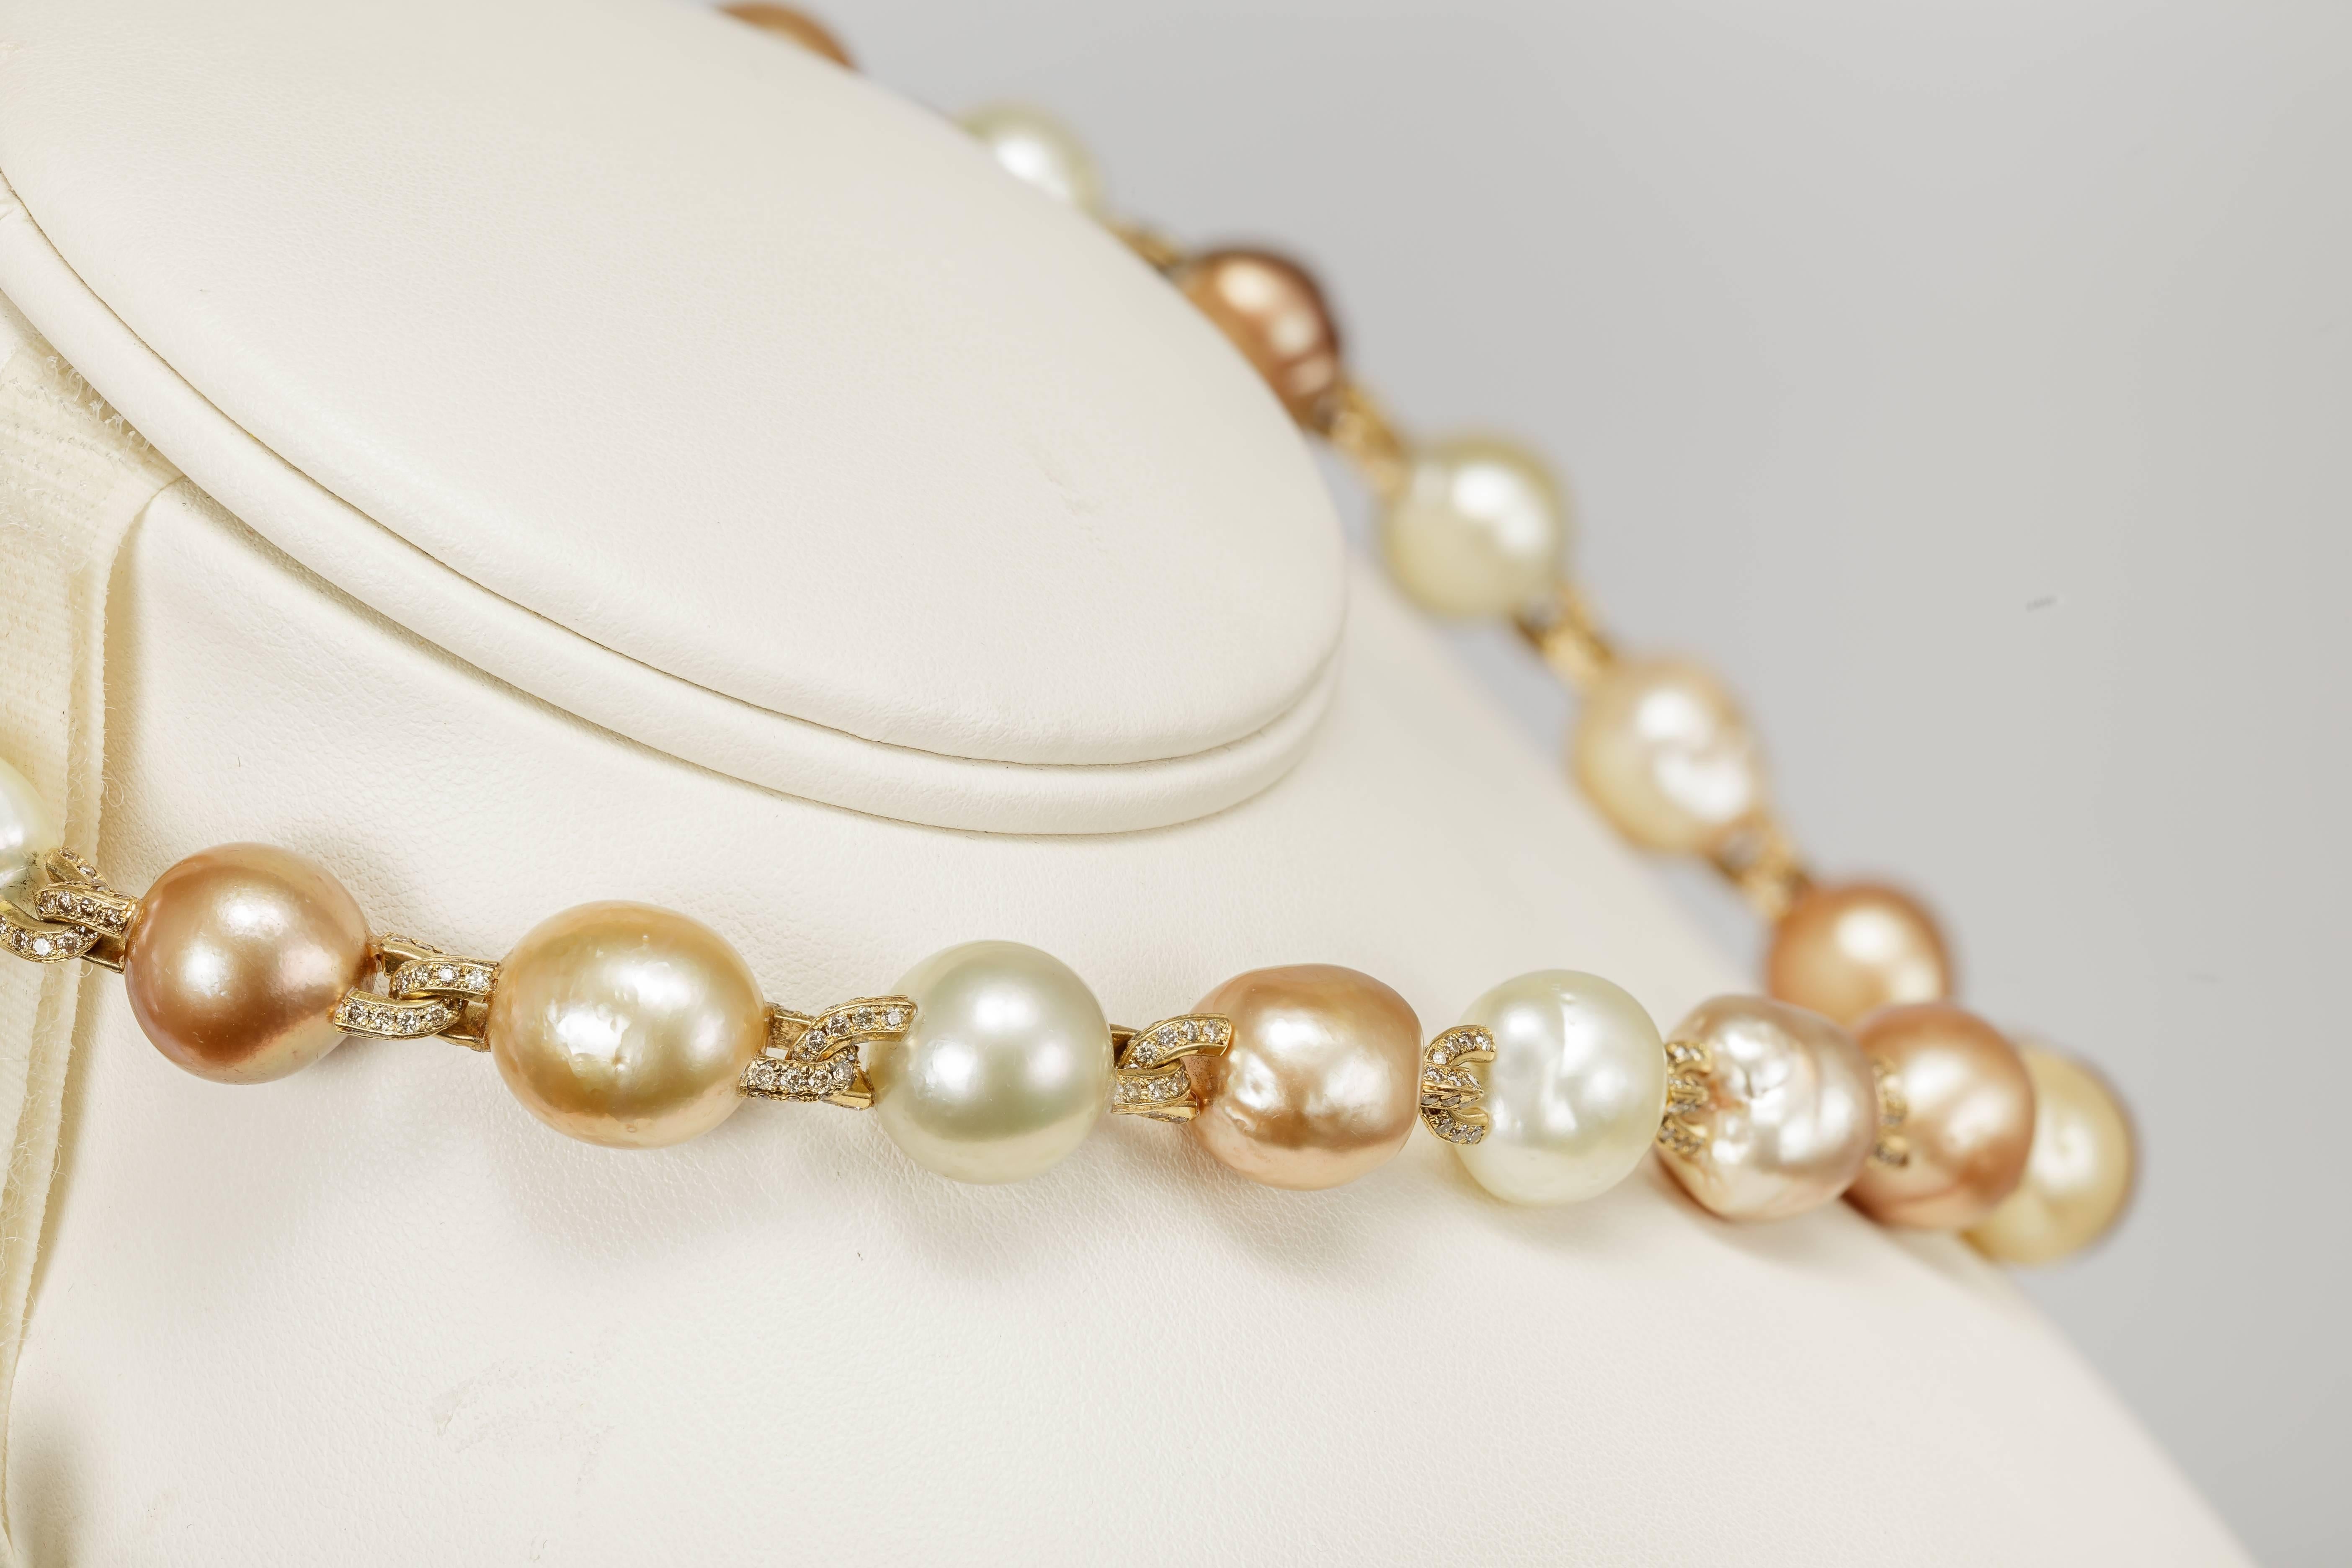 Yvel Baroque Pearl and Diamond Necklace 18 Karat Yellow Gold 4.14 Carat In New Condition For Sale In Houston, TX